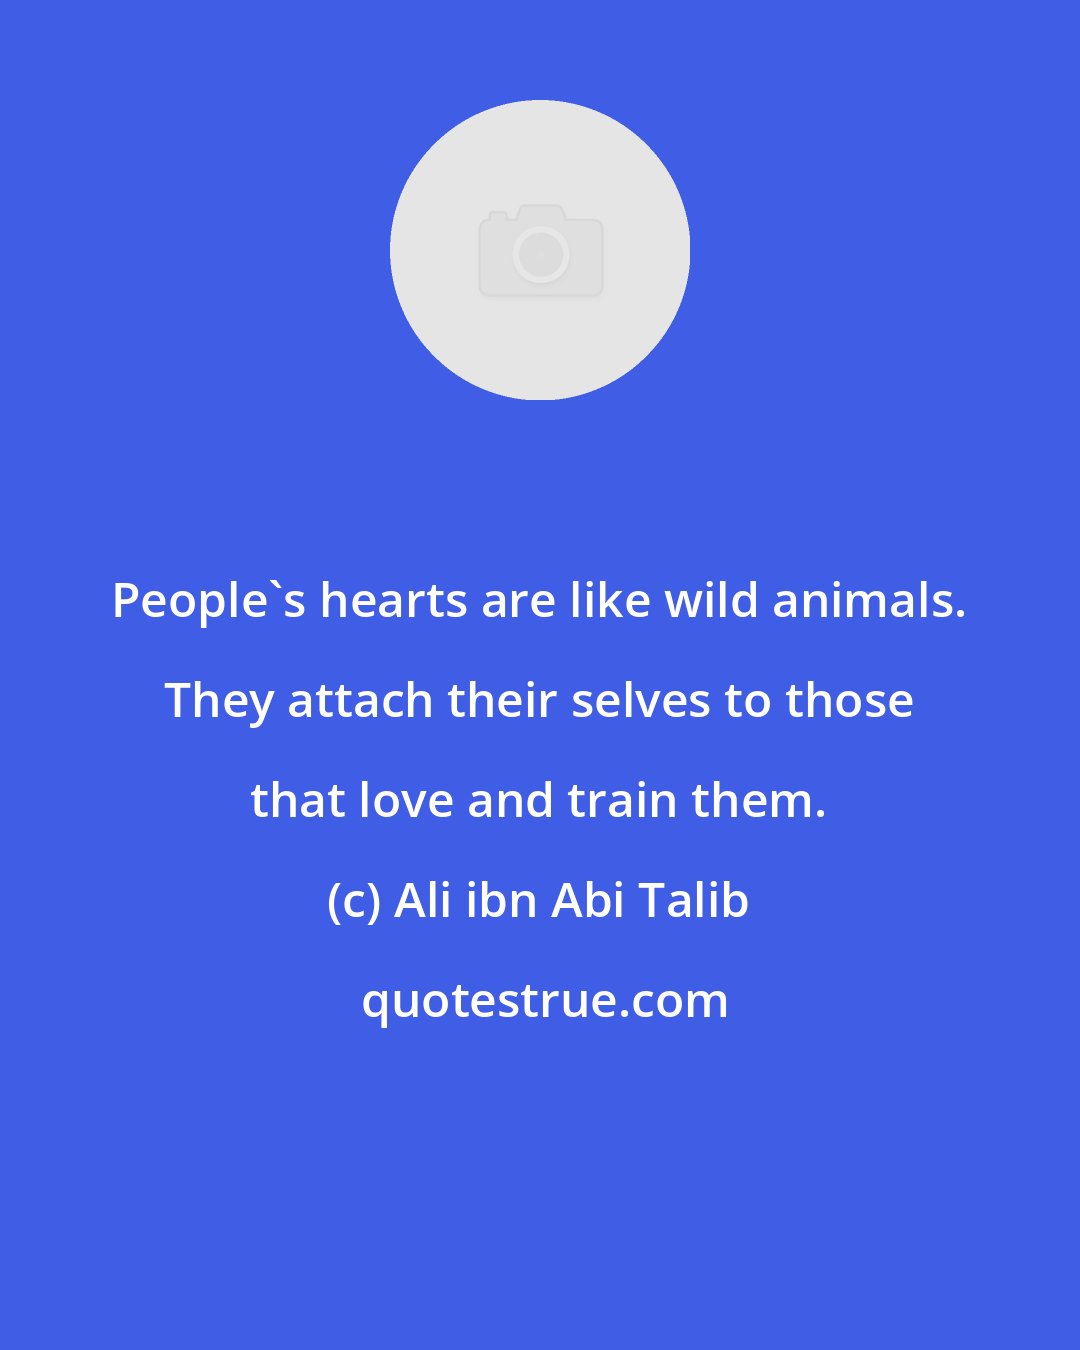 Ali ibn Abi Talib: People's hearts are like wild animals. They attach their selves to those that love and train them.